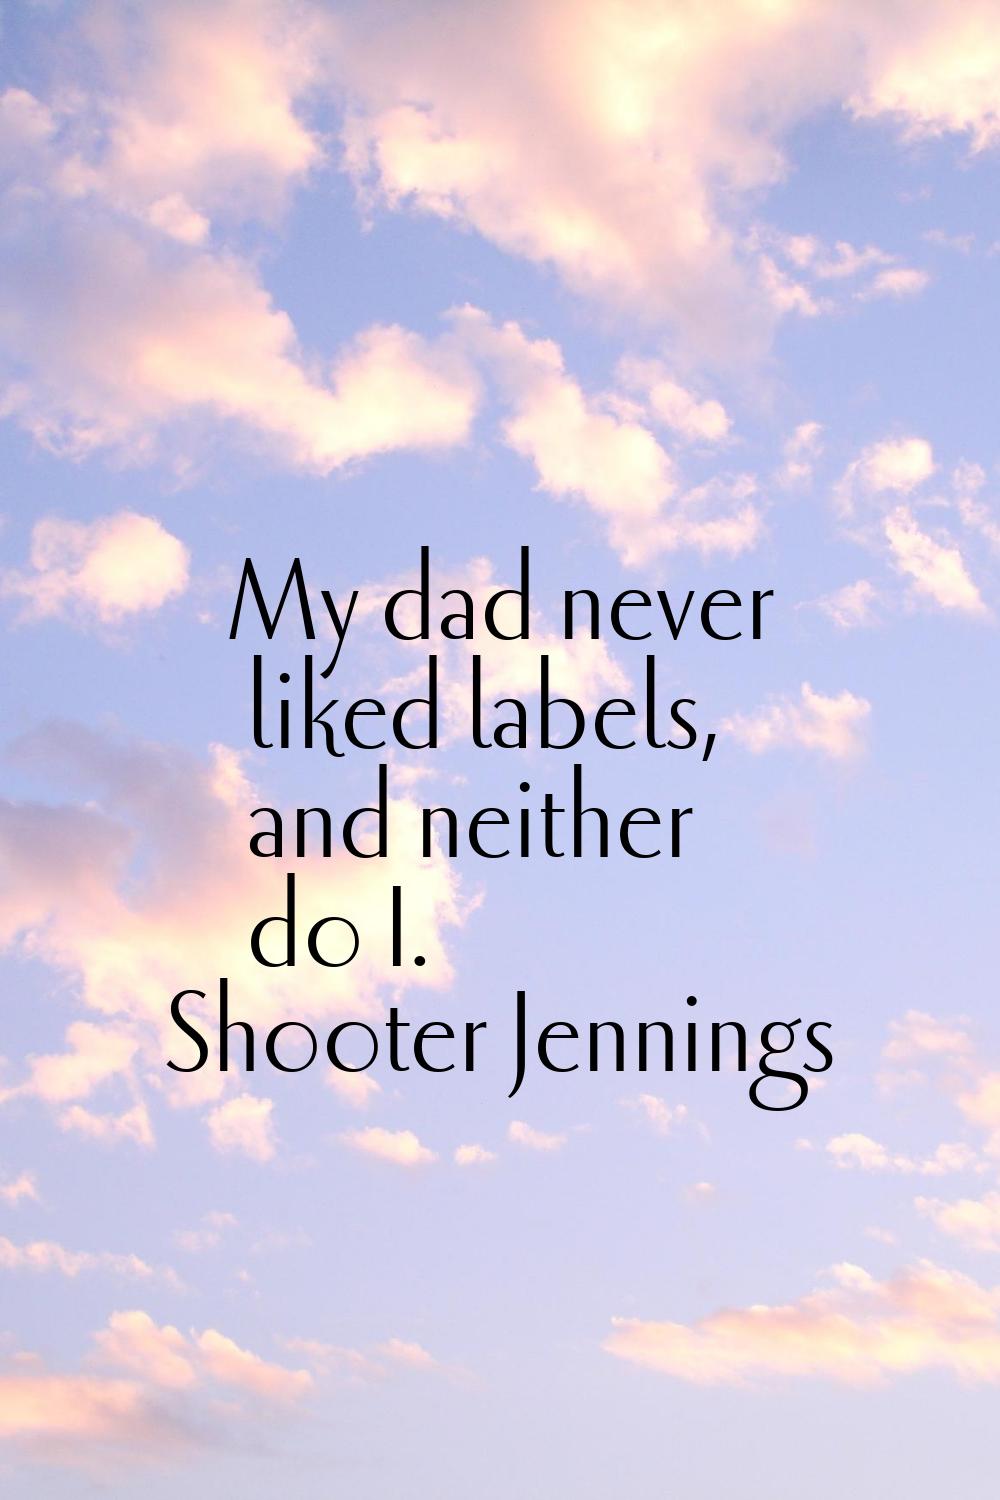 My dad never liked labels, and neither do I.